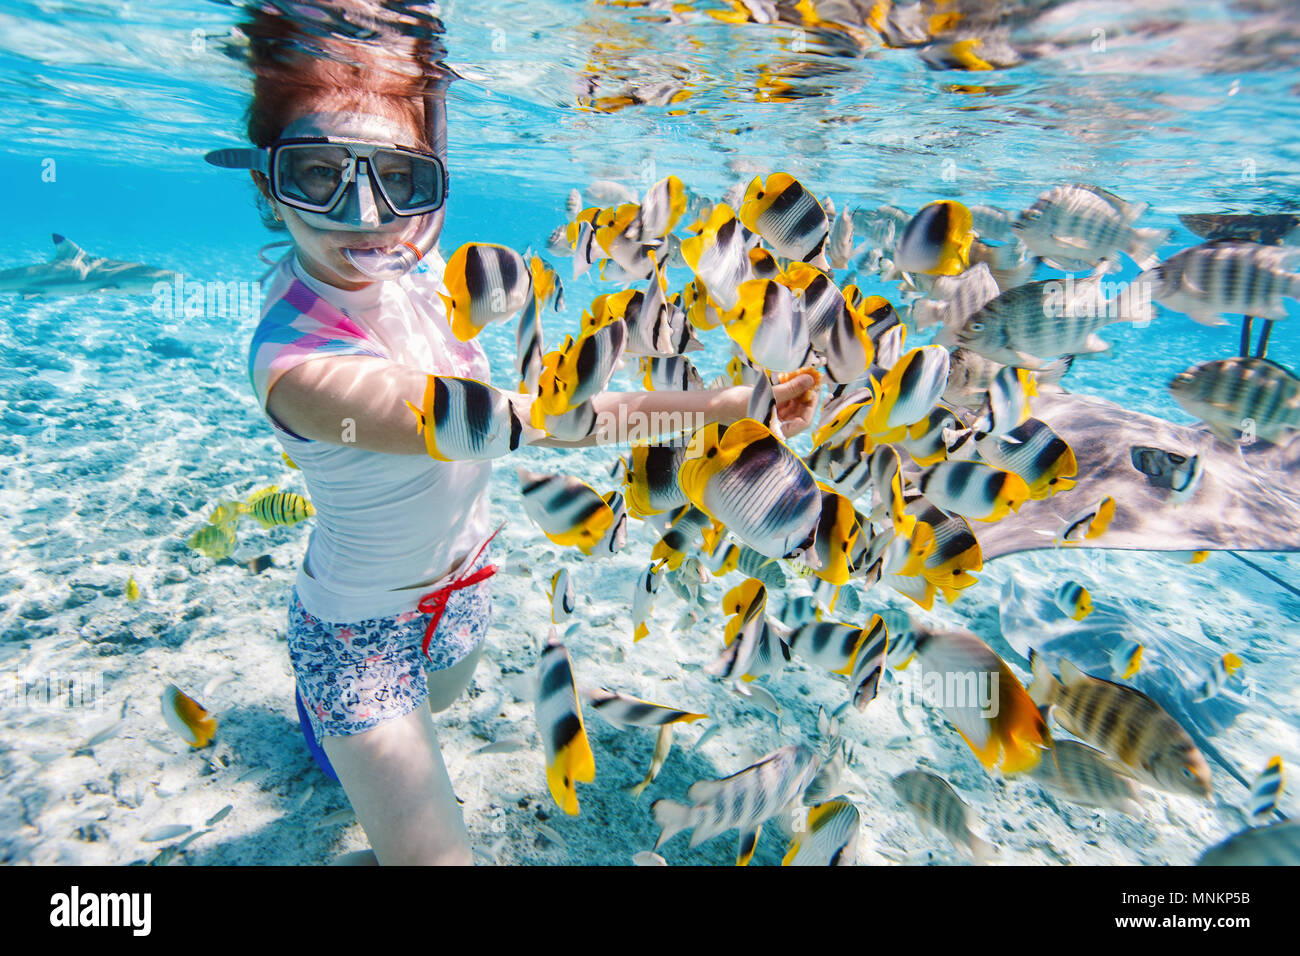 Woman snorkeling in clear tropical waters among colorful fish Stock Photo